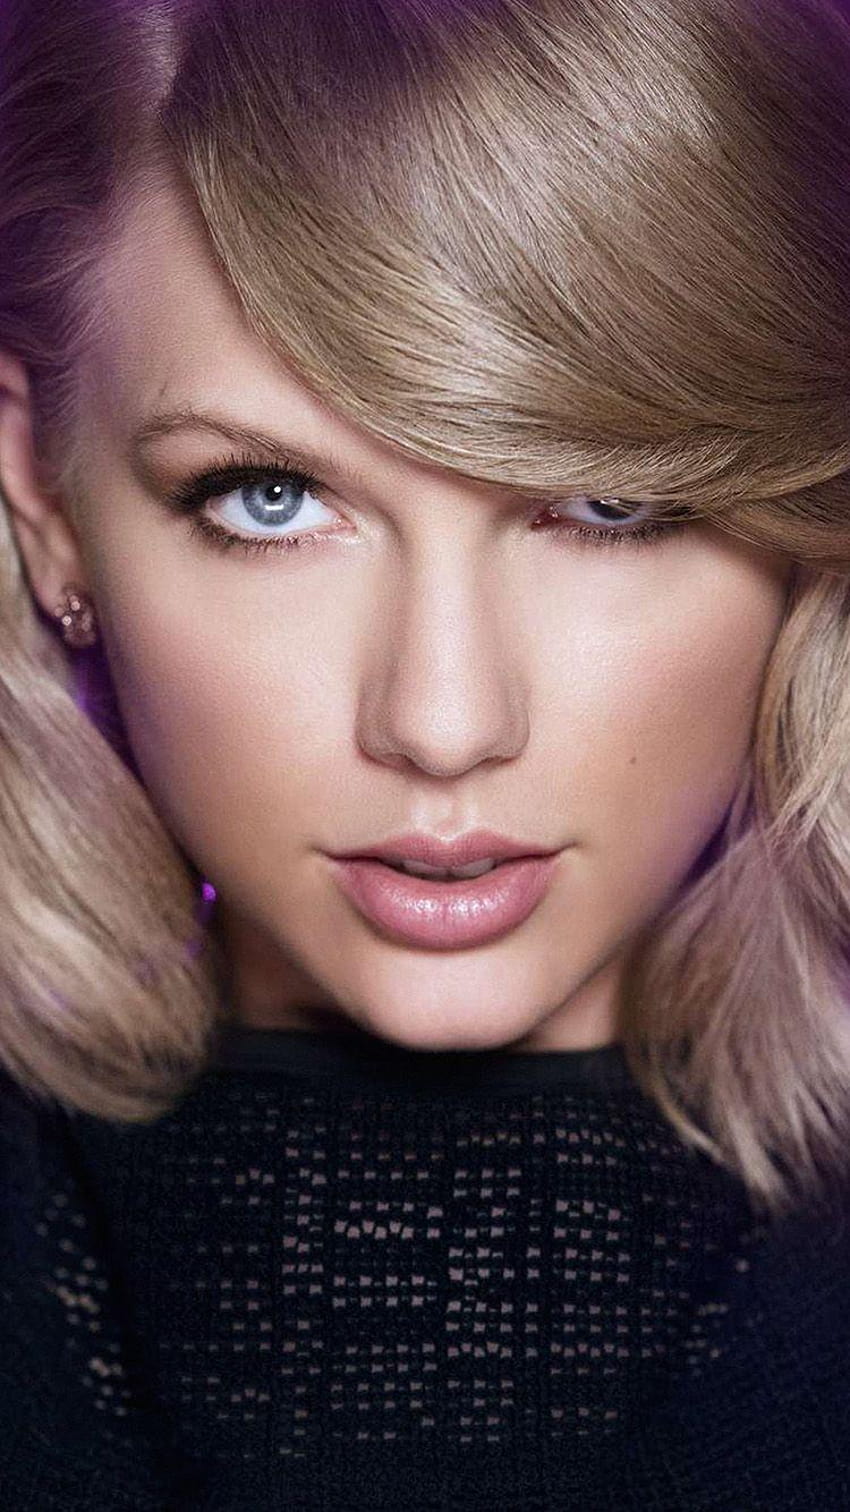 TAYLOR SWIFT FACE MUSIC CELEBRITY IPHONE, ponsel taylor swift wallpaper ponsel HD